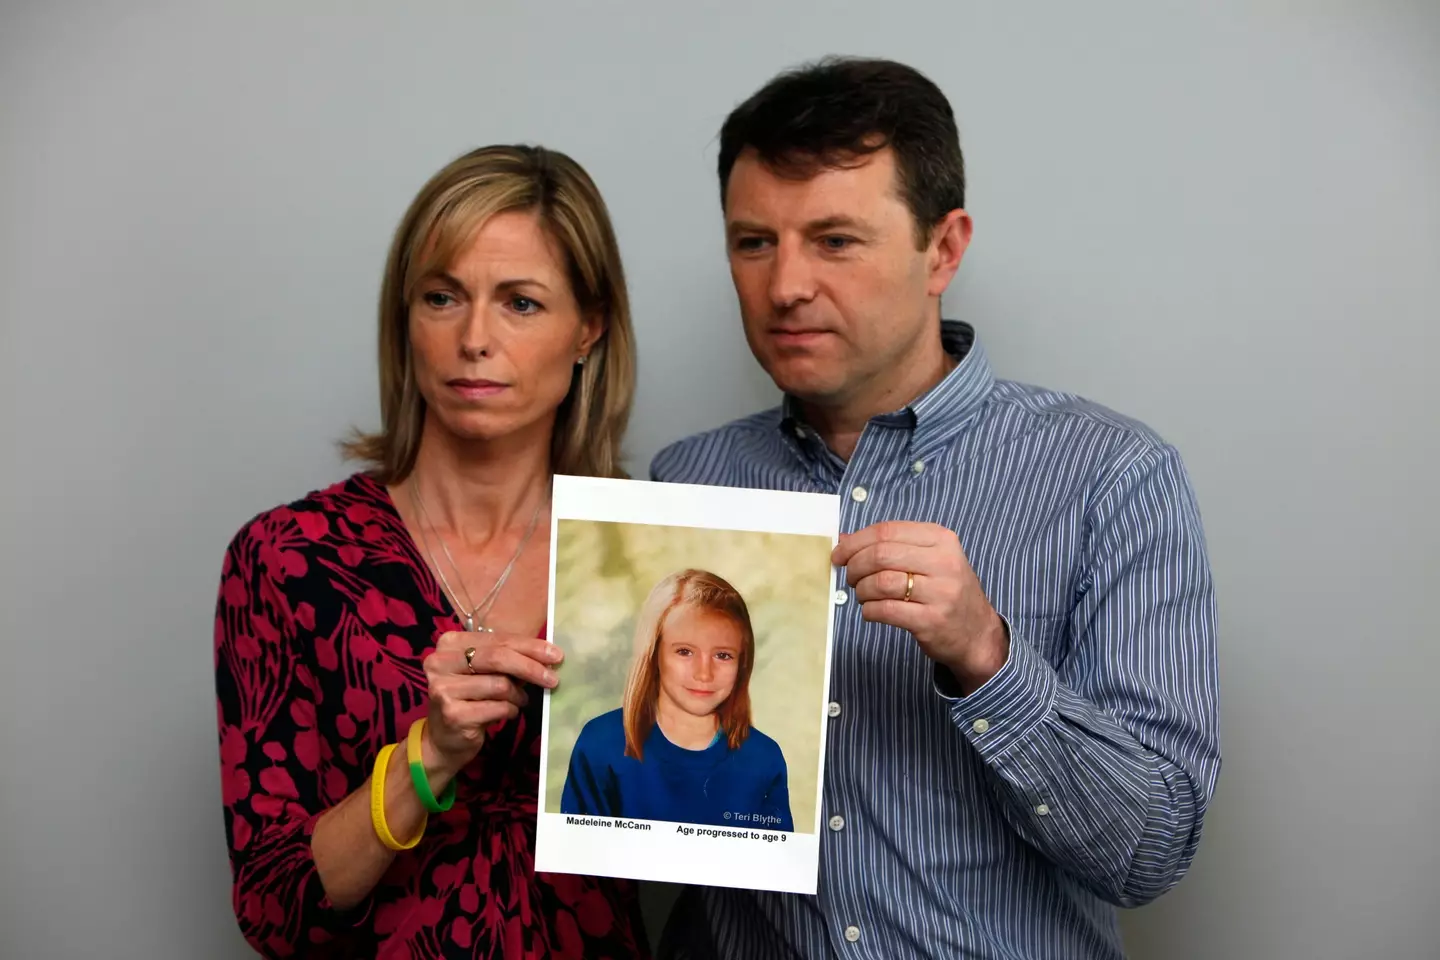 Wendell has apologised to Kate and Gerry McCann.